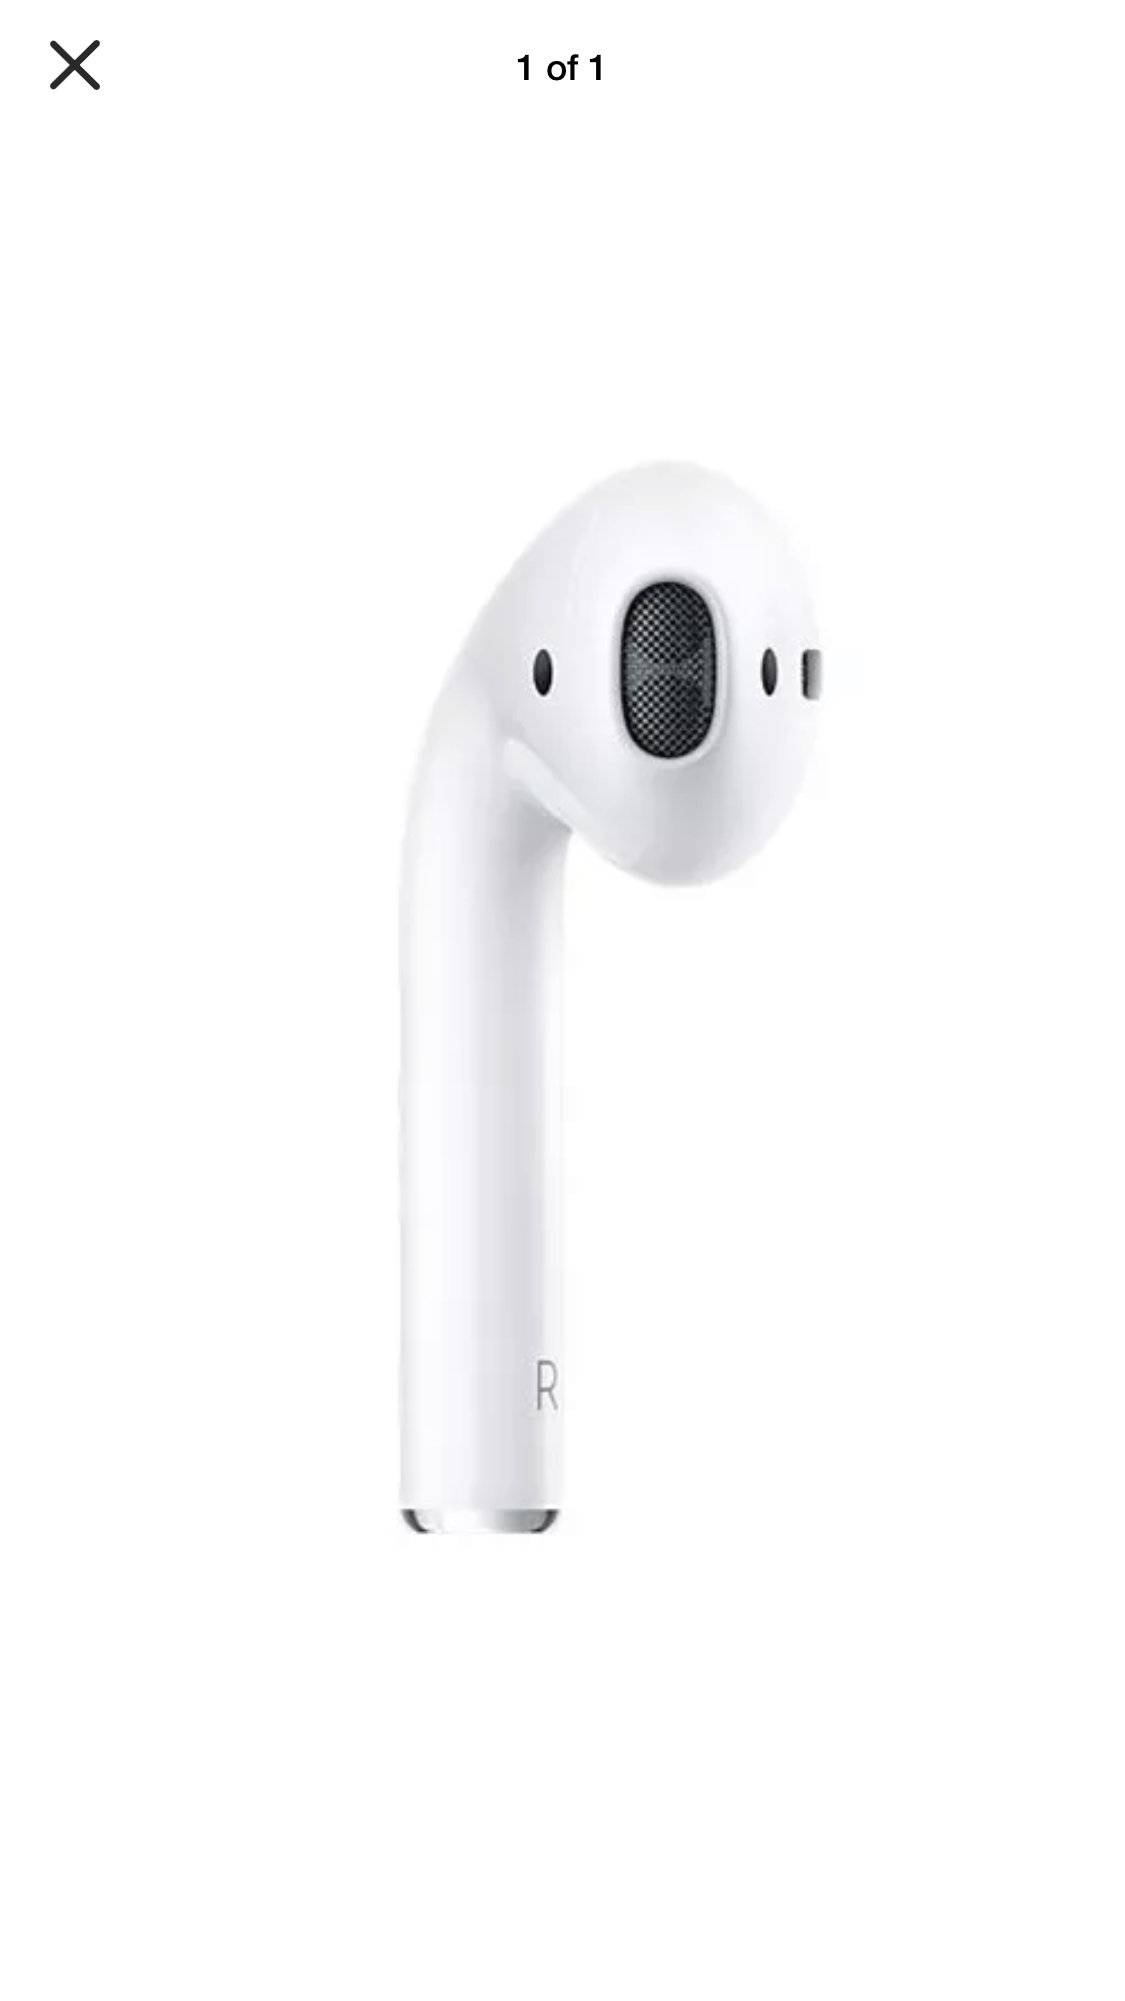 can you buy one airpod